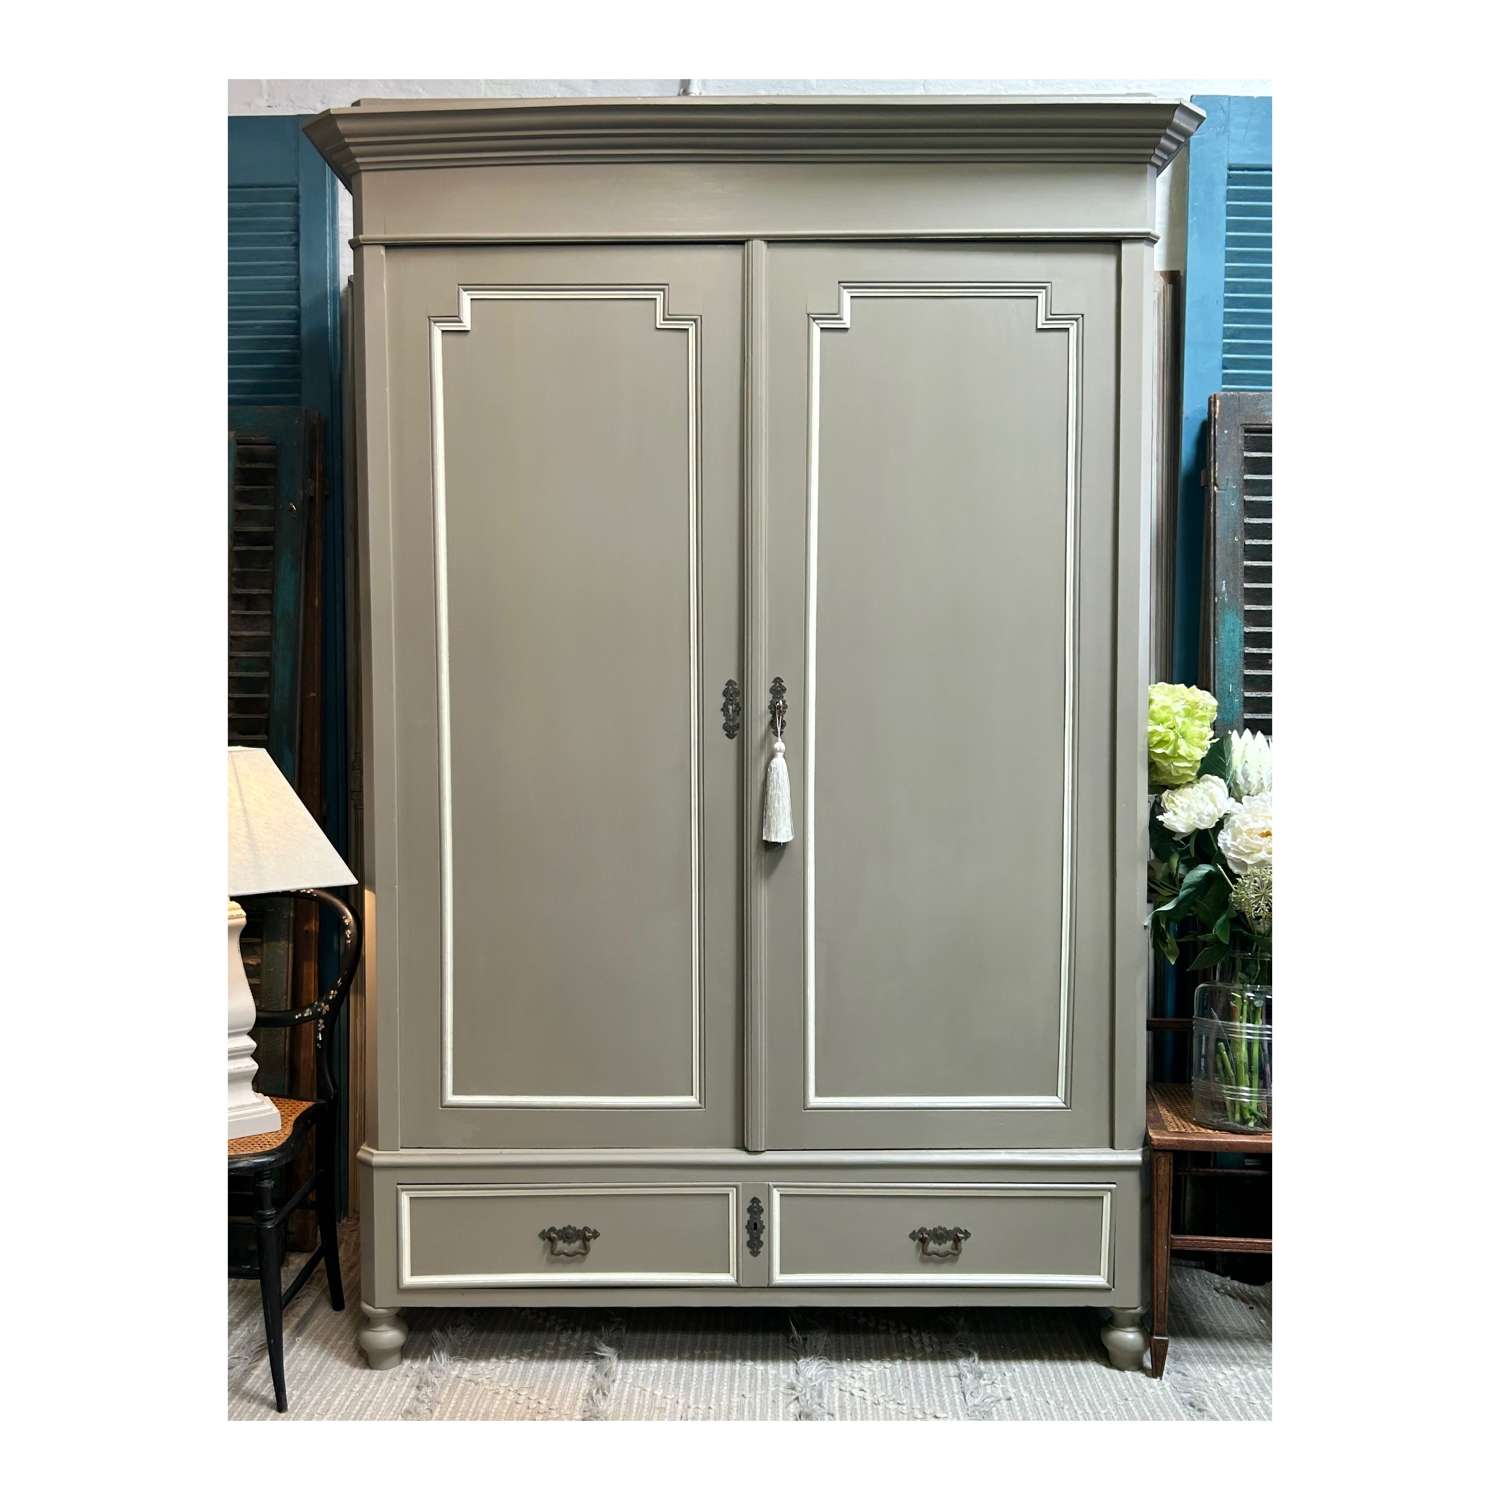 Large Georgian Style French Painted Armoire Knockdown Wardrobe c1900